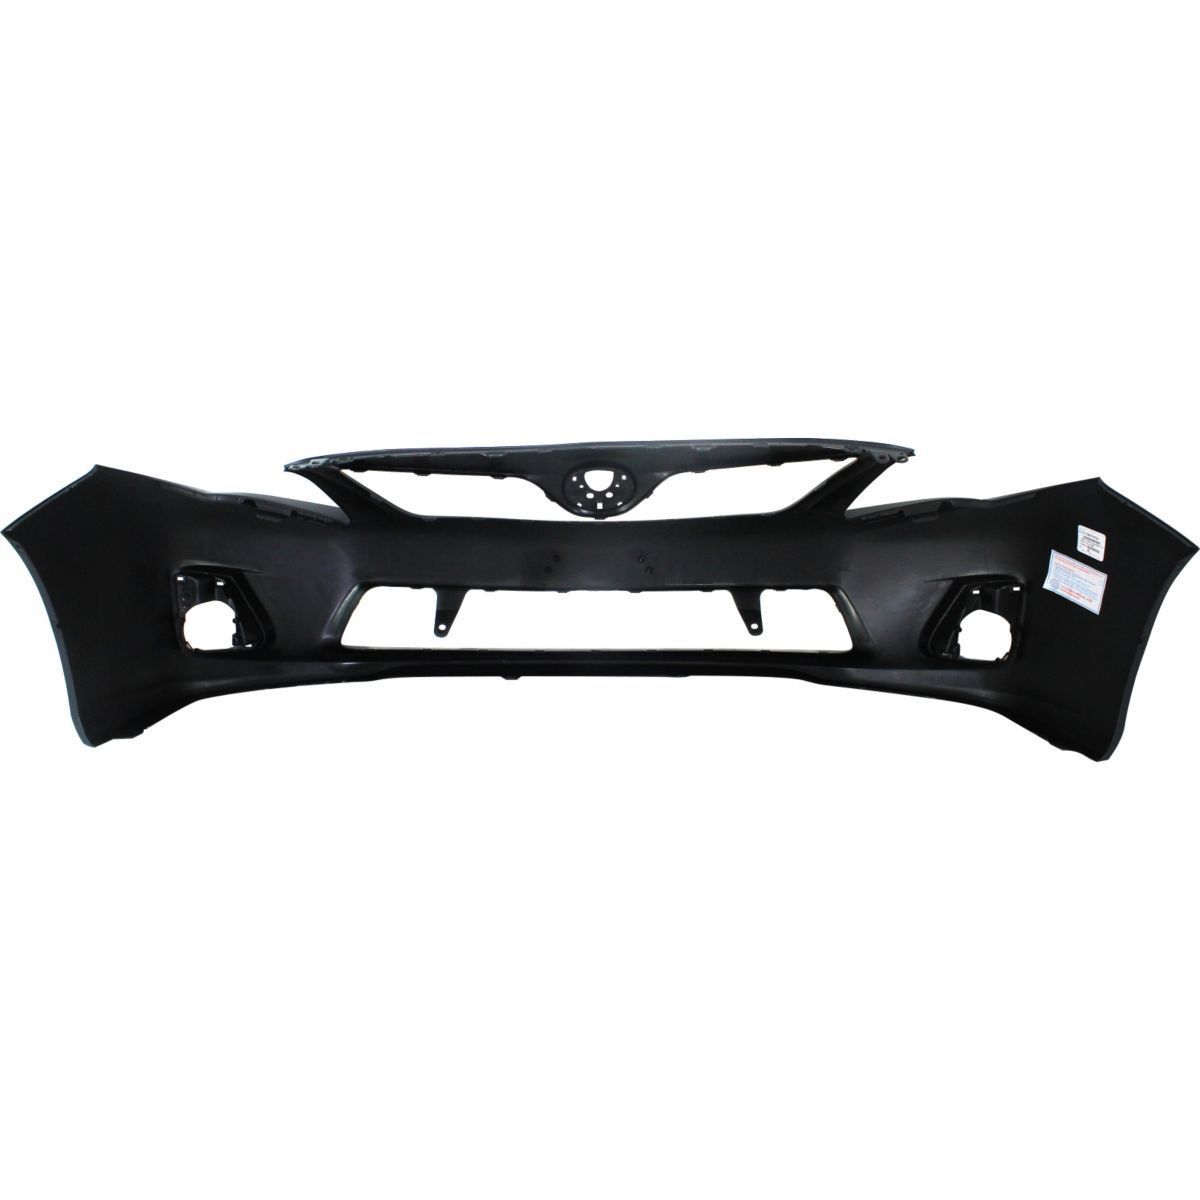 Toyota Corolla 2011 - 2013 Front Bumper Cover 11 - 13 TO1000380 Bumper King